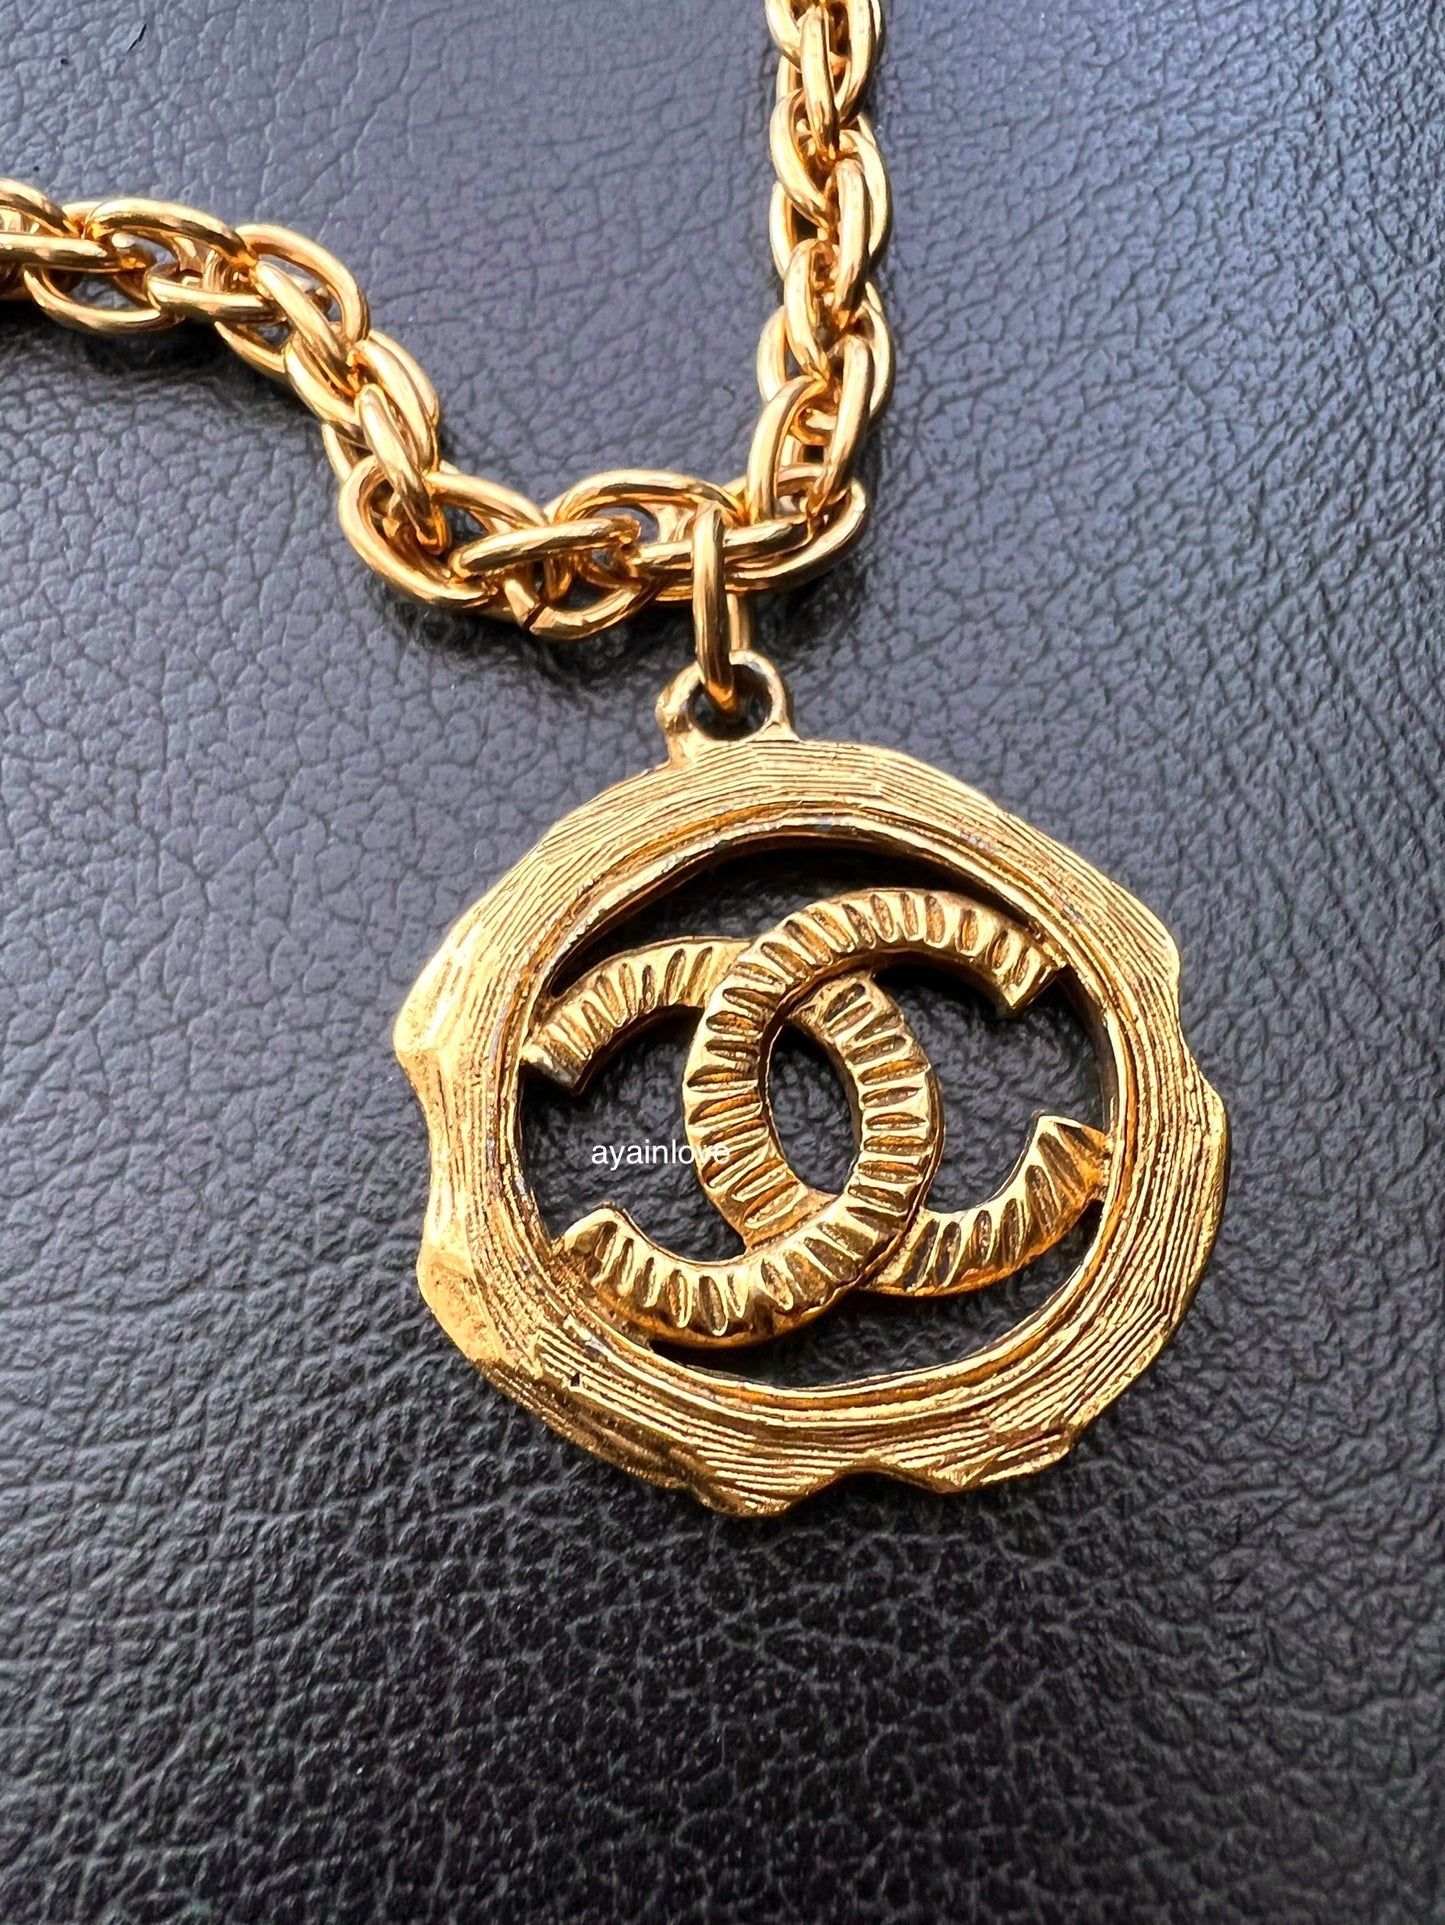 CHANEL 1980s Vintage Charms Medallion Chain Belt Necklace 24K Gold Plated Hardware